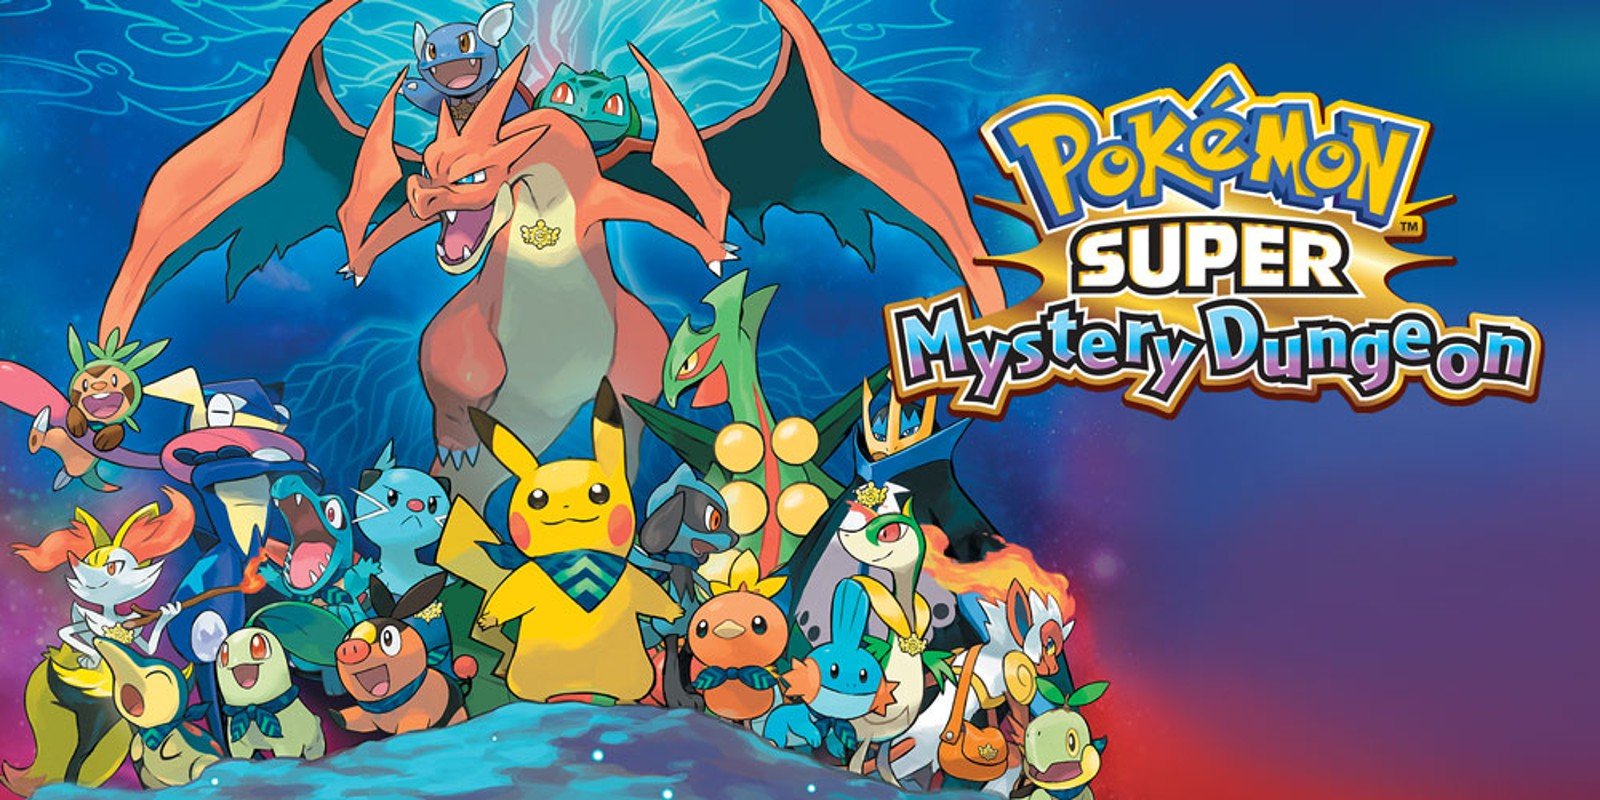 More information about "Pokémon Super Mystery Dungeon (U) Postgame"